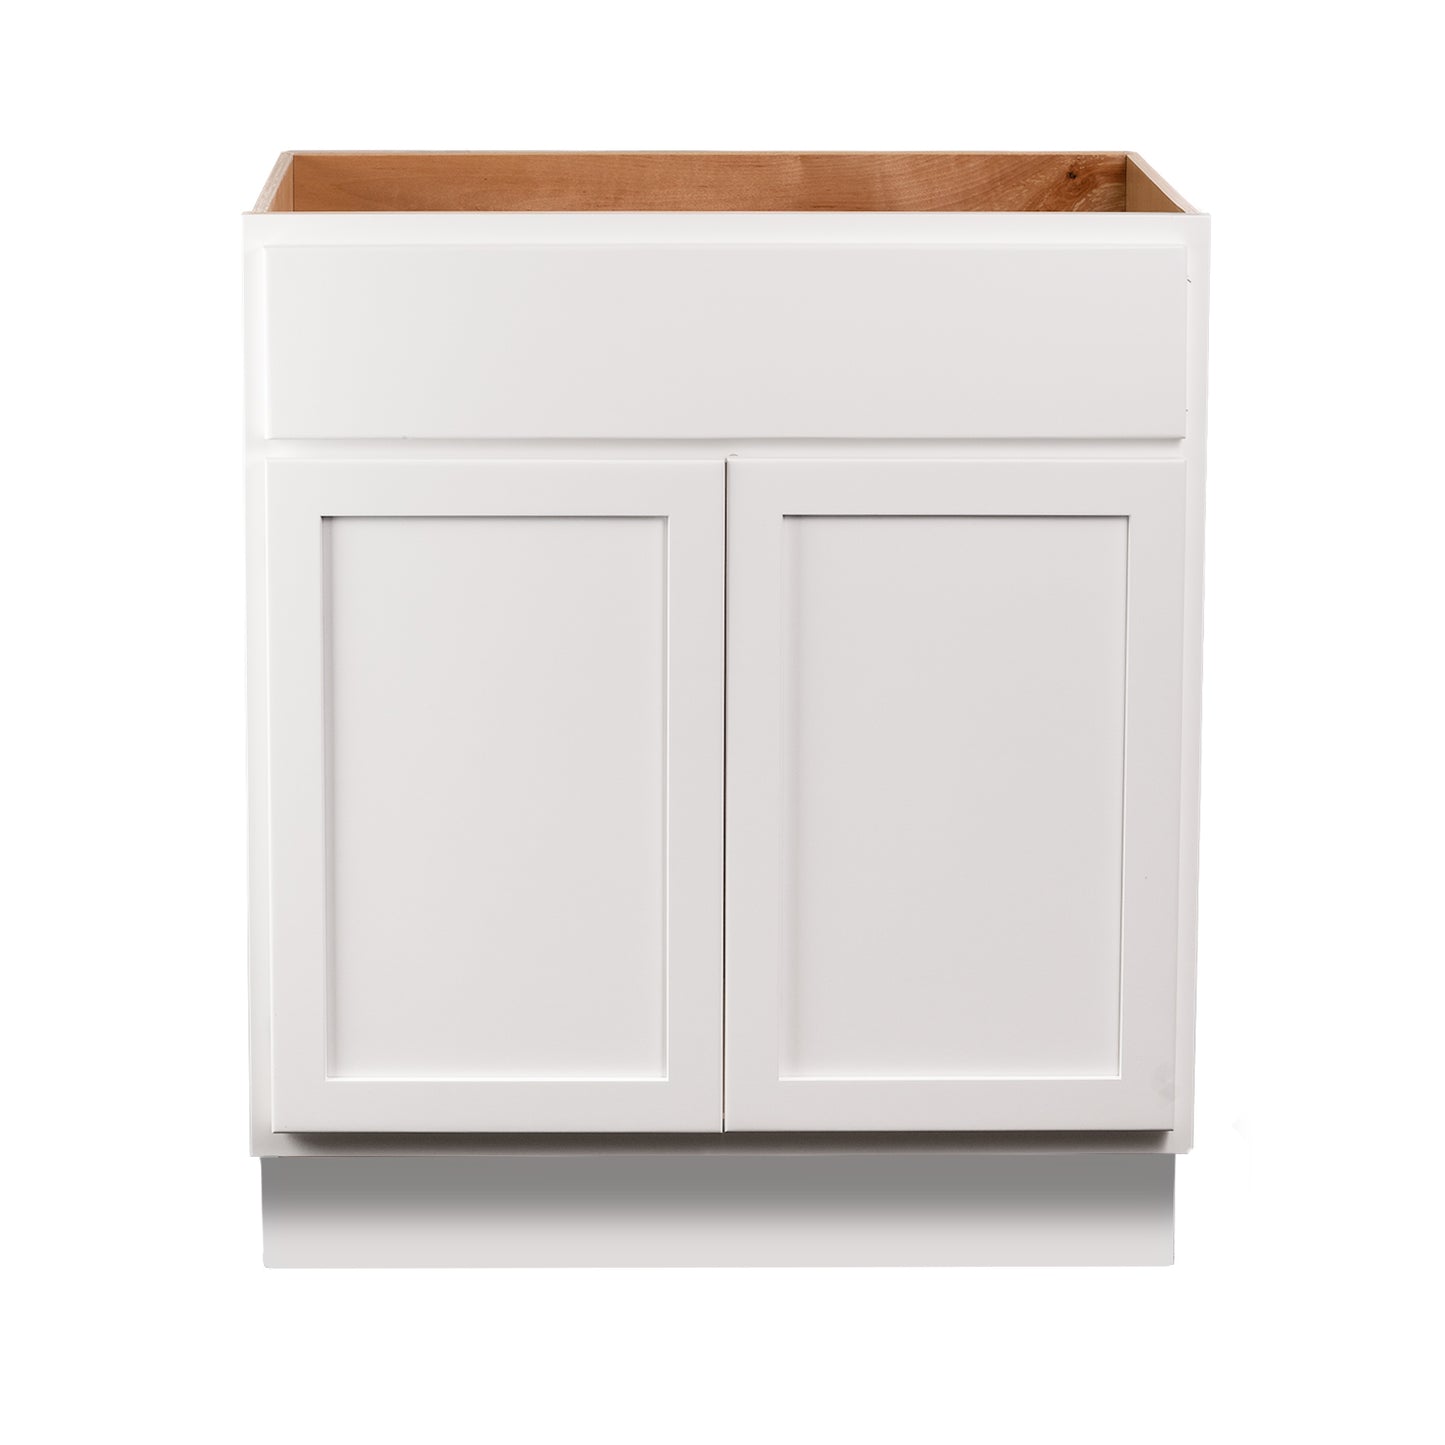 Quicklock RTA (Ready-to-Assemble) Pure White Vanity Base Cabinet | 24"Wx34.5"Hx18"D